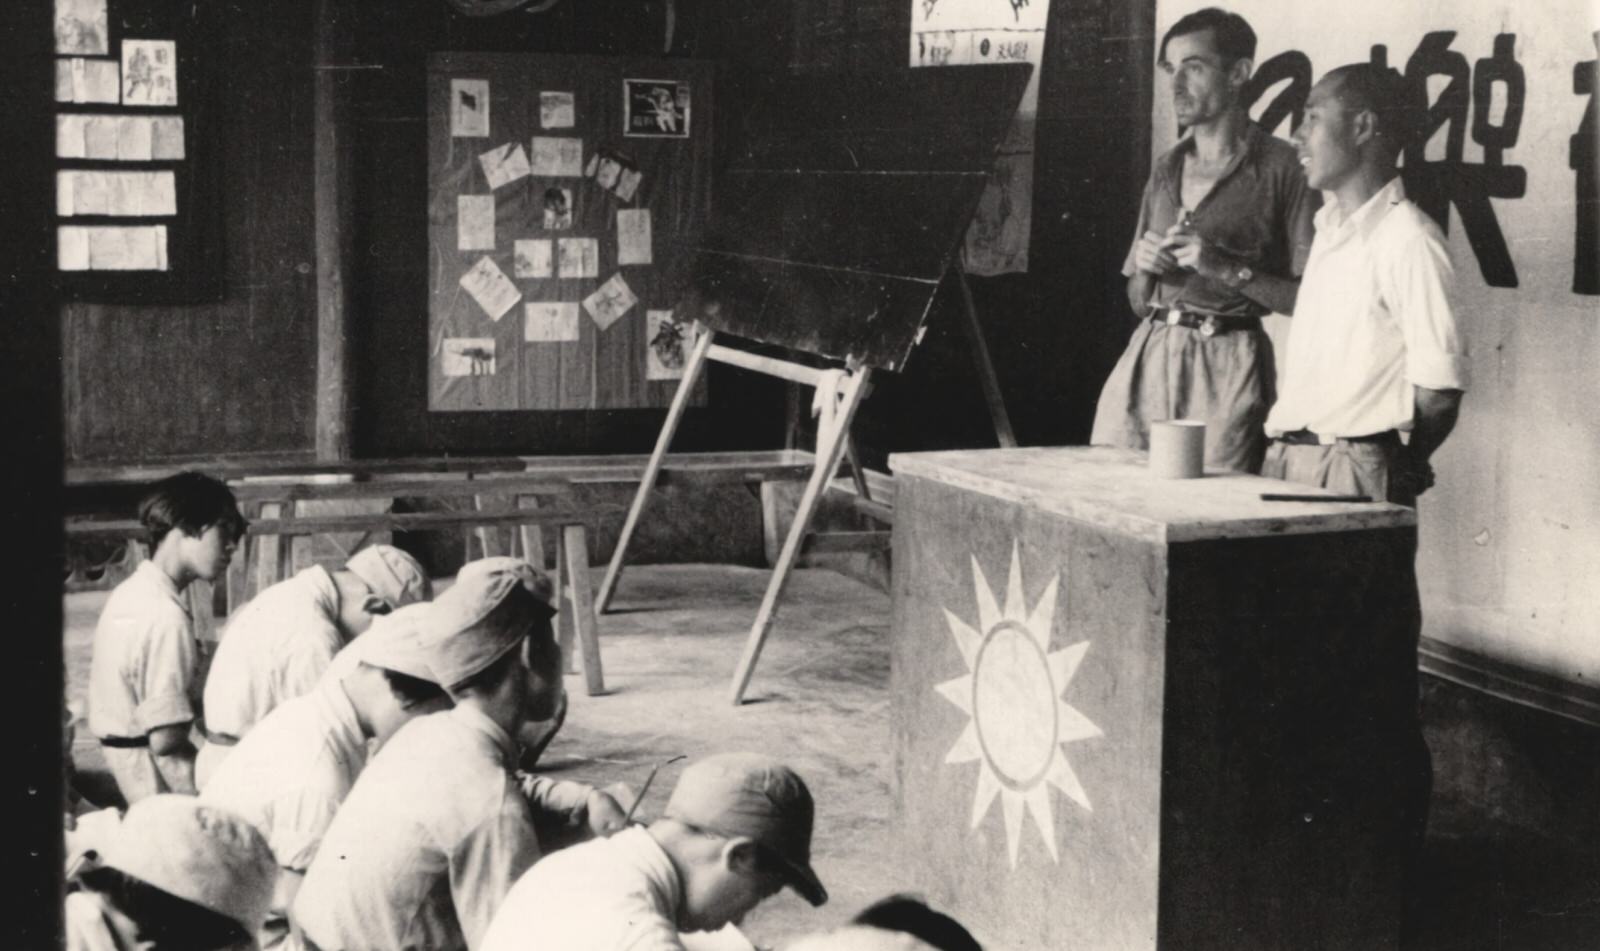 Dr. Eric Landauer, member of the League of National Anti-Epidemic Commission, lectures on public health in the Medical Training School of the New Fourth Army. Dr. Gung (Gong) translated.